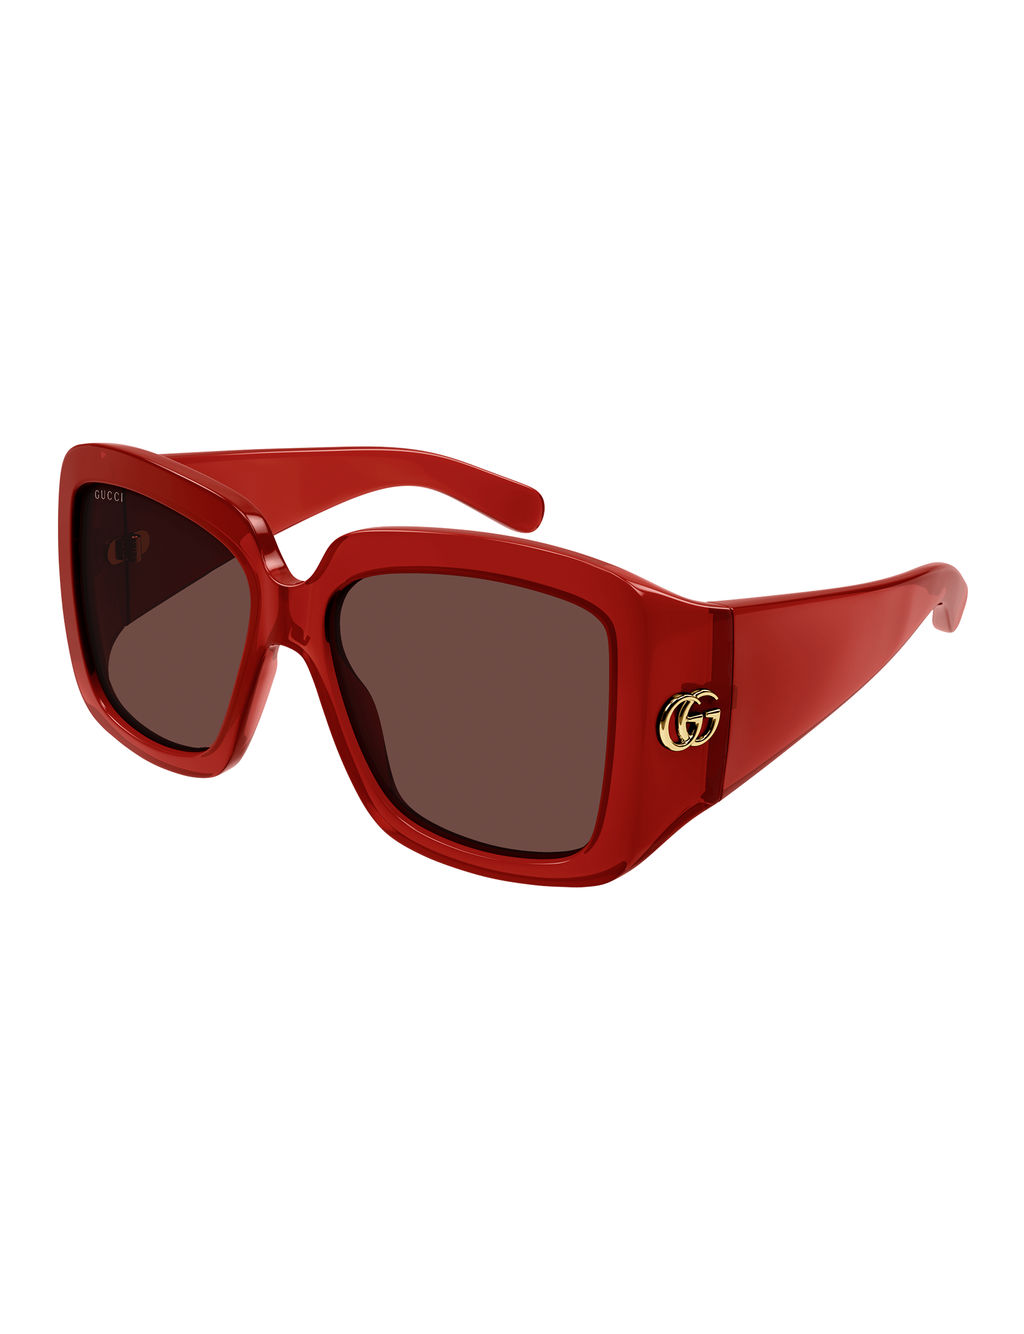 Red Eye Square Sunglasses, Red/Brown